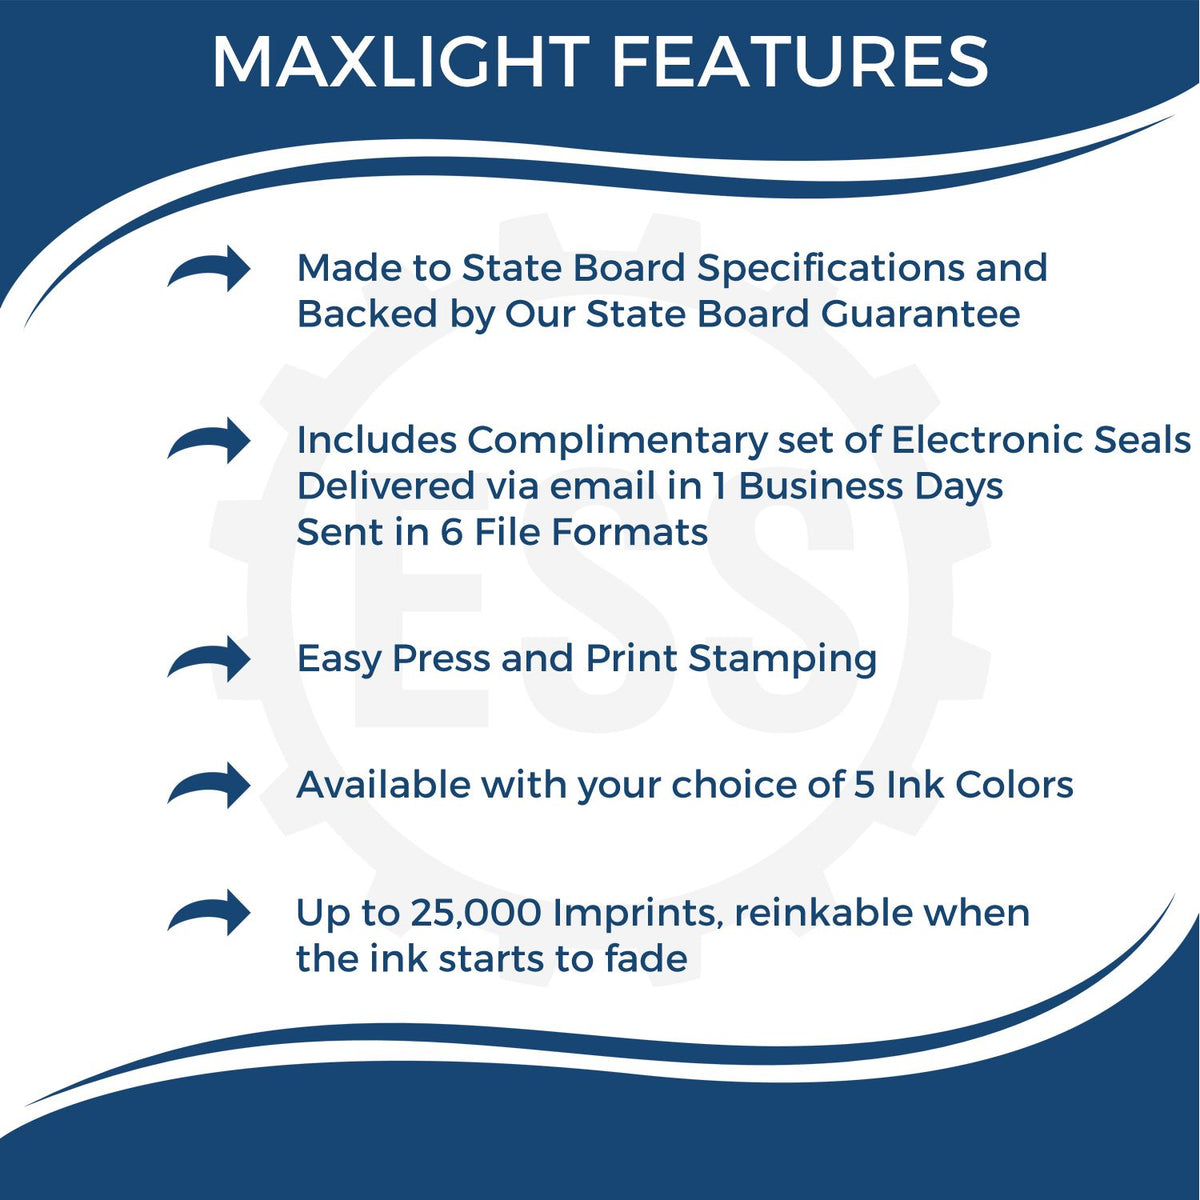 A picture of an infographic highlighting the selling points for the Premium MaxLight Pre-Inked Nevada Engineering Stamp